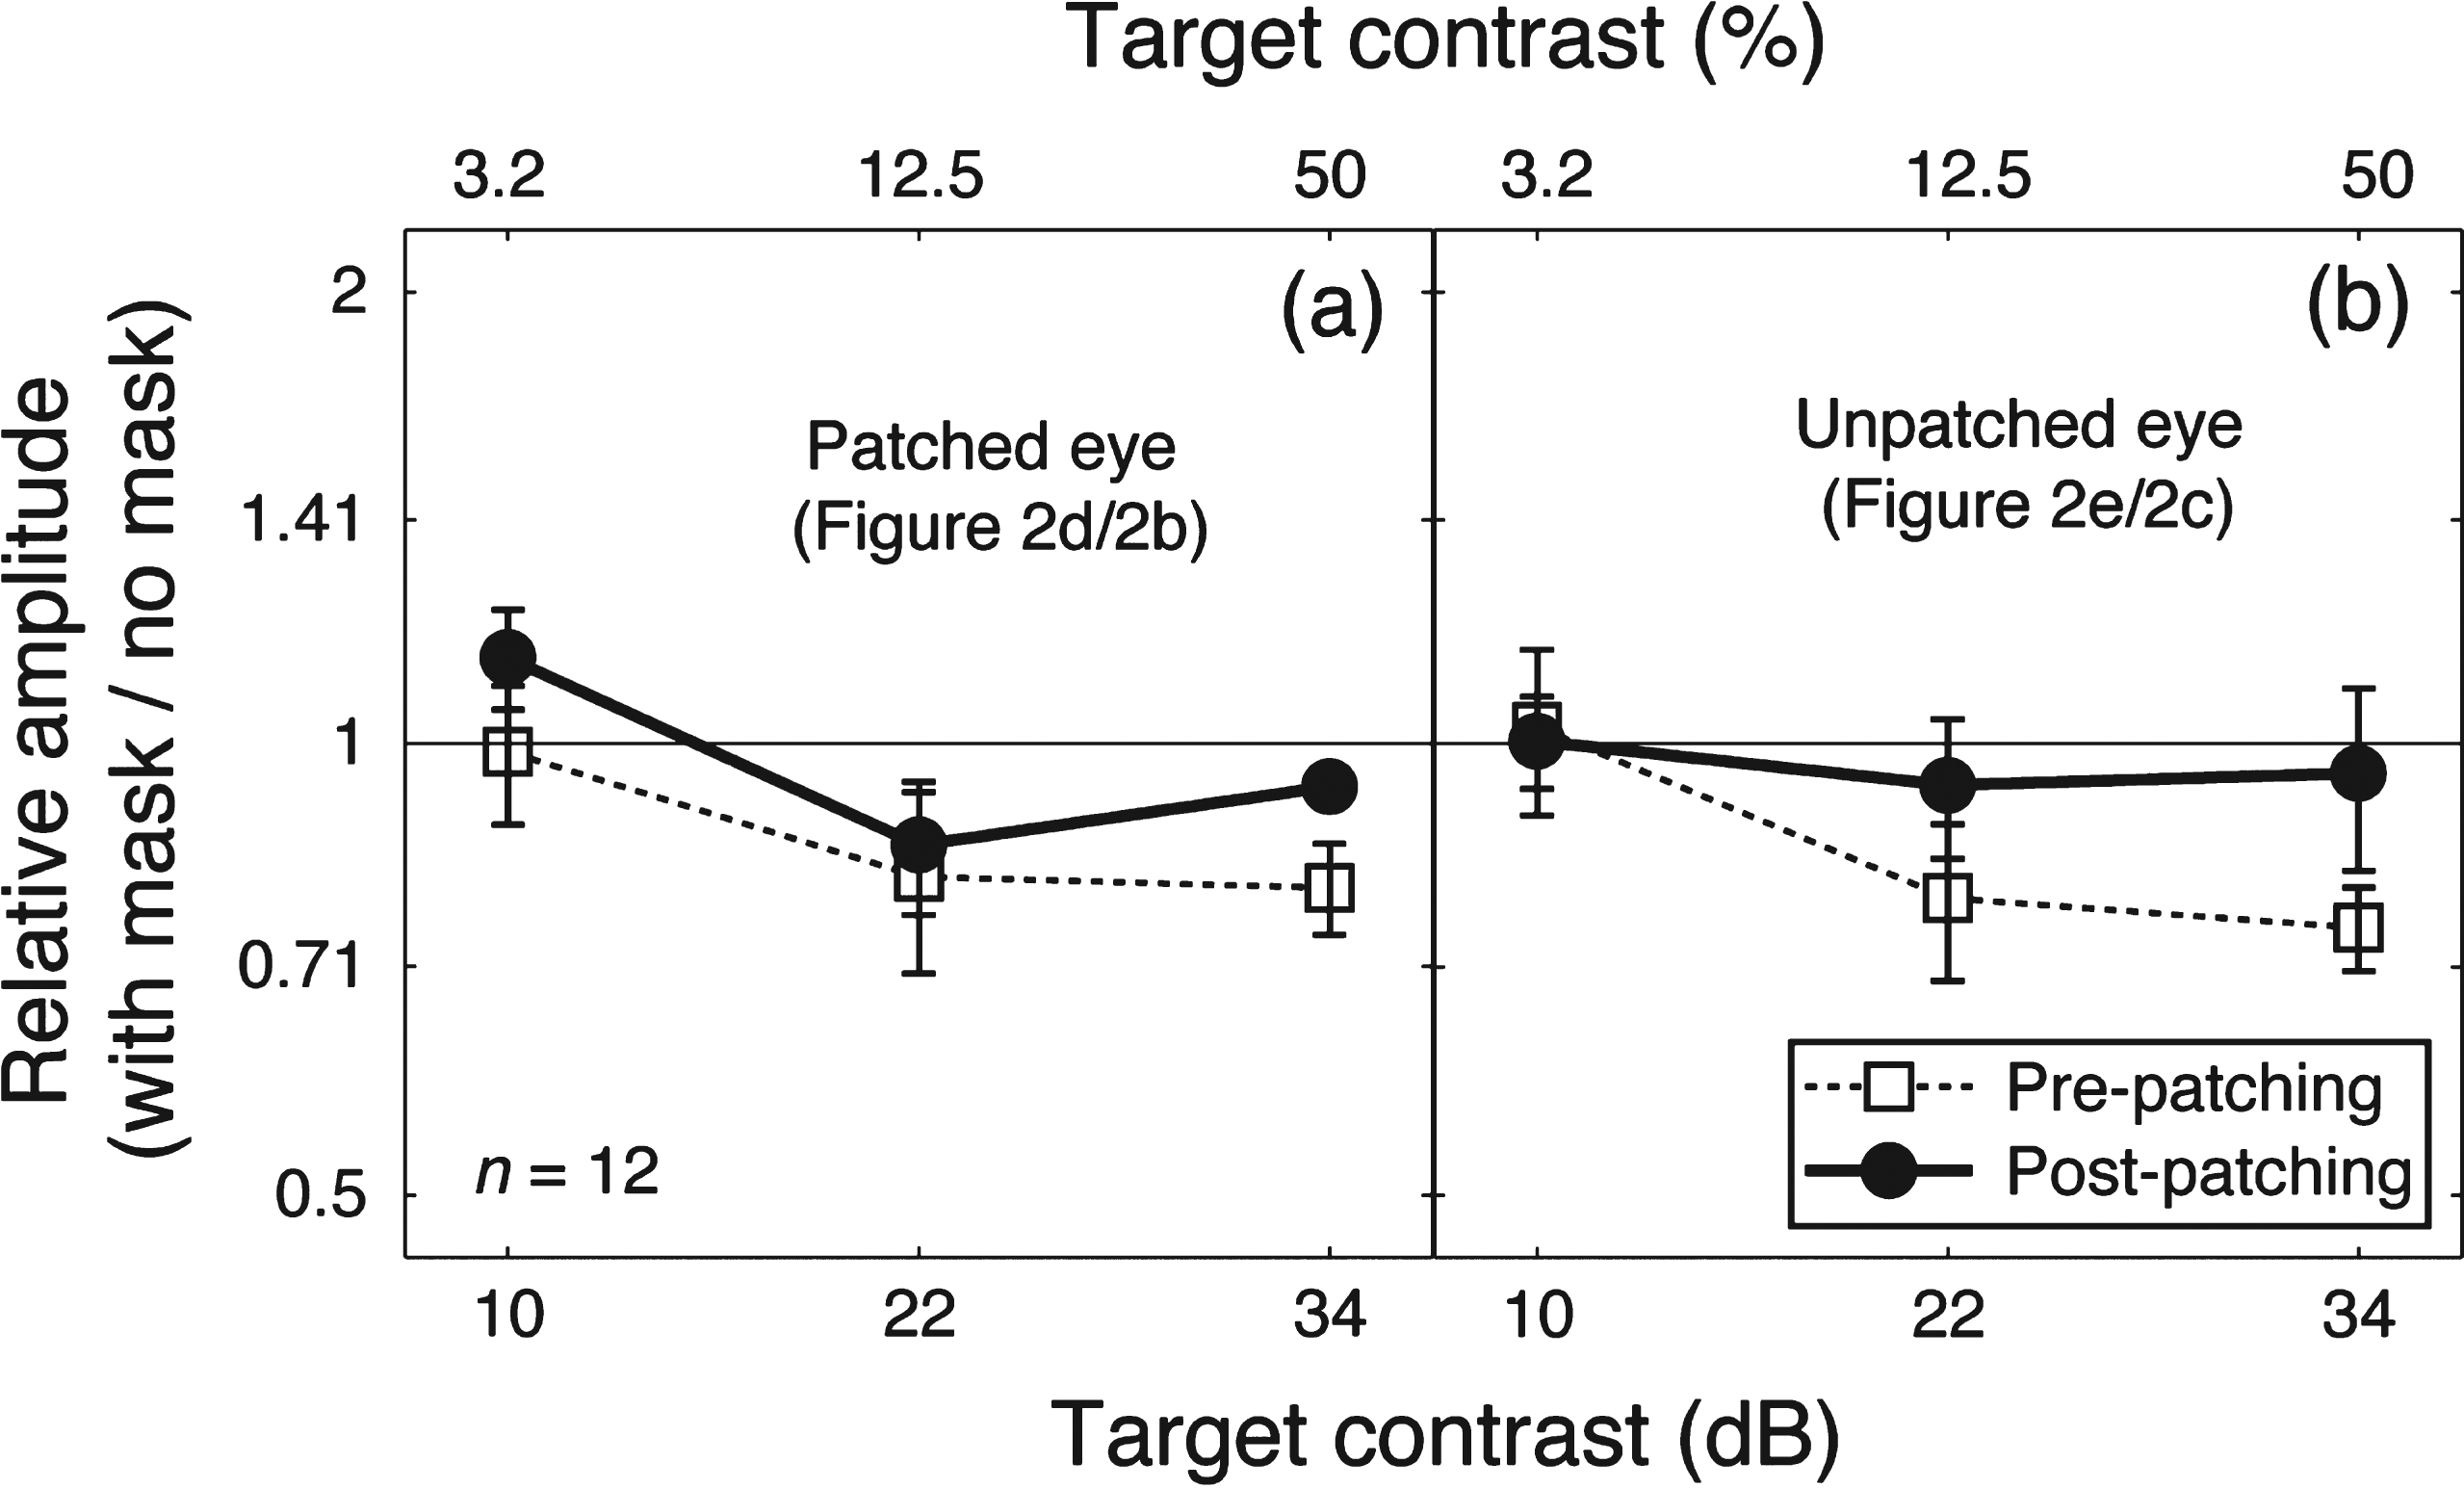 The dichoptic masking effect on SSVEP amplitudes at the target frequency. Relative SSVEP amplitude (with mask/no mask) plotted against target contrast for the patched eye (a) and unpatched eye (b). Points lower than the middle identity line indicate dichoptic masking effects of the mask on SSVEP amplitudes at the target frequency. Error bars give±1 standard error across observers (n =12).